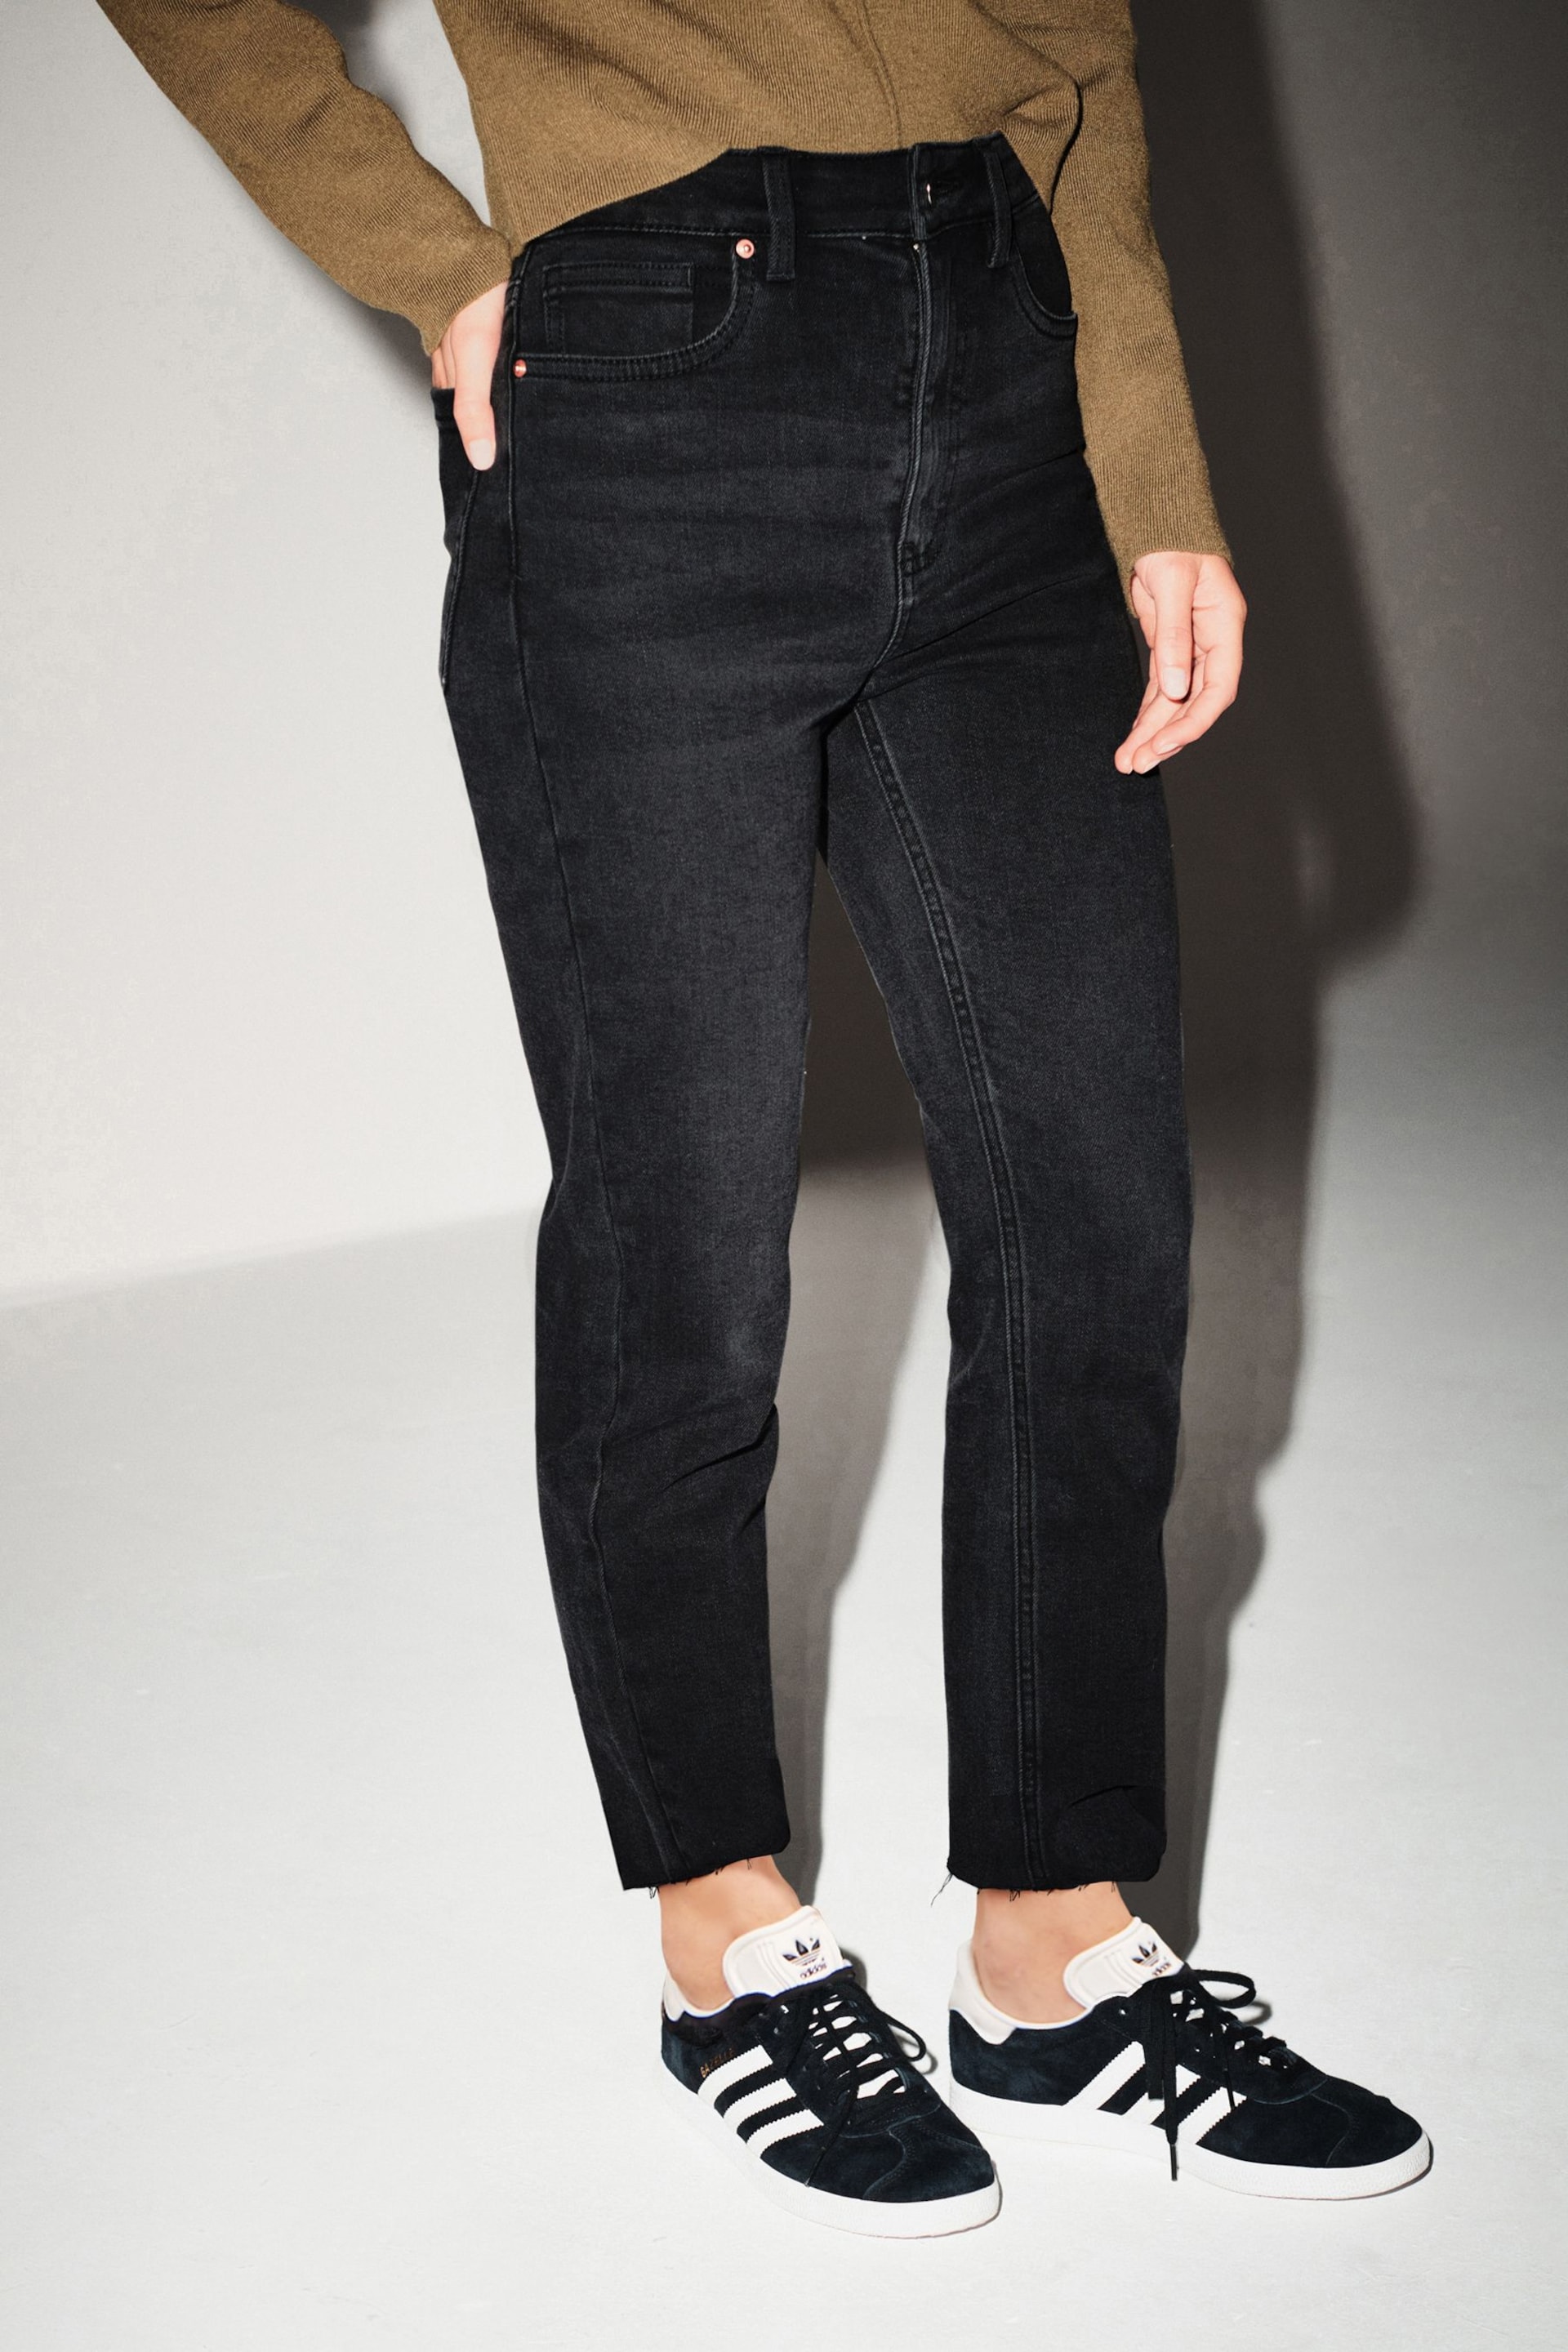 Washed Black Straight Leg Jeans With Raw Hem - Image 2 of 5